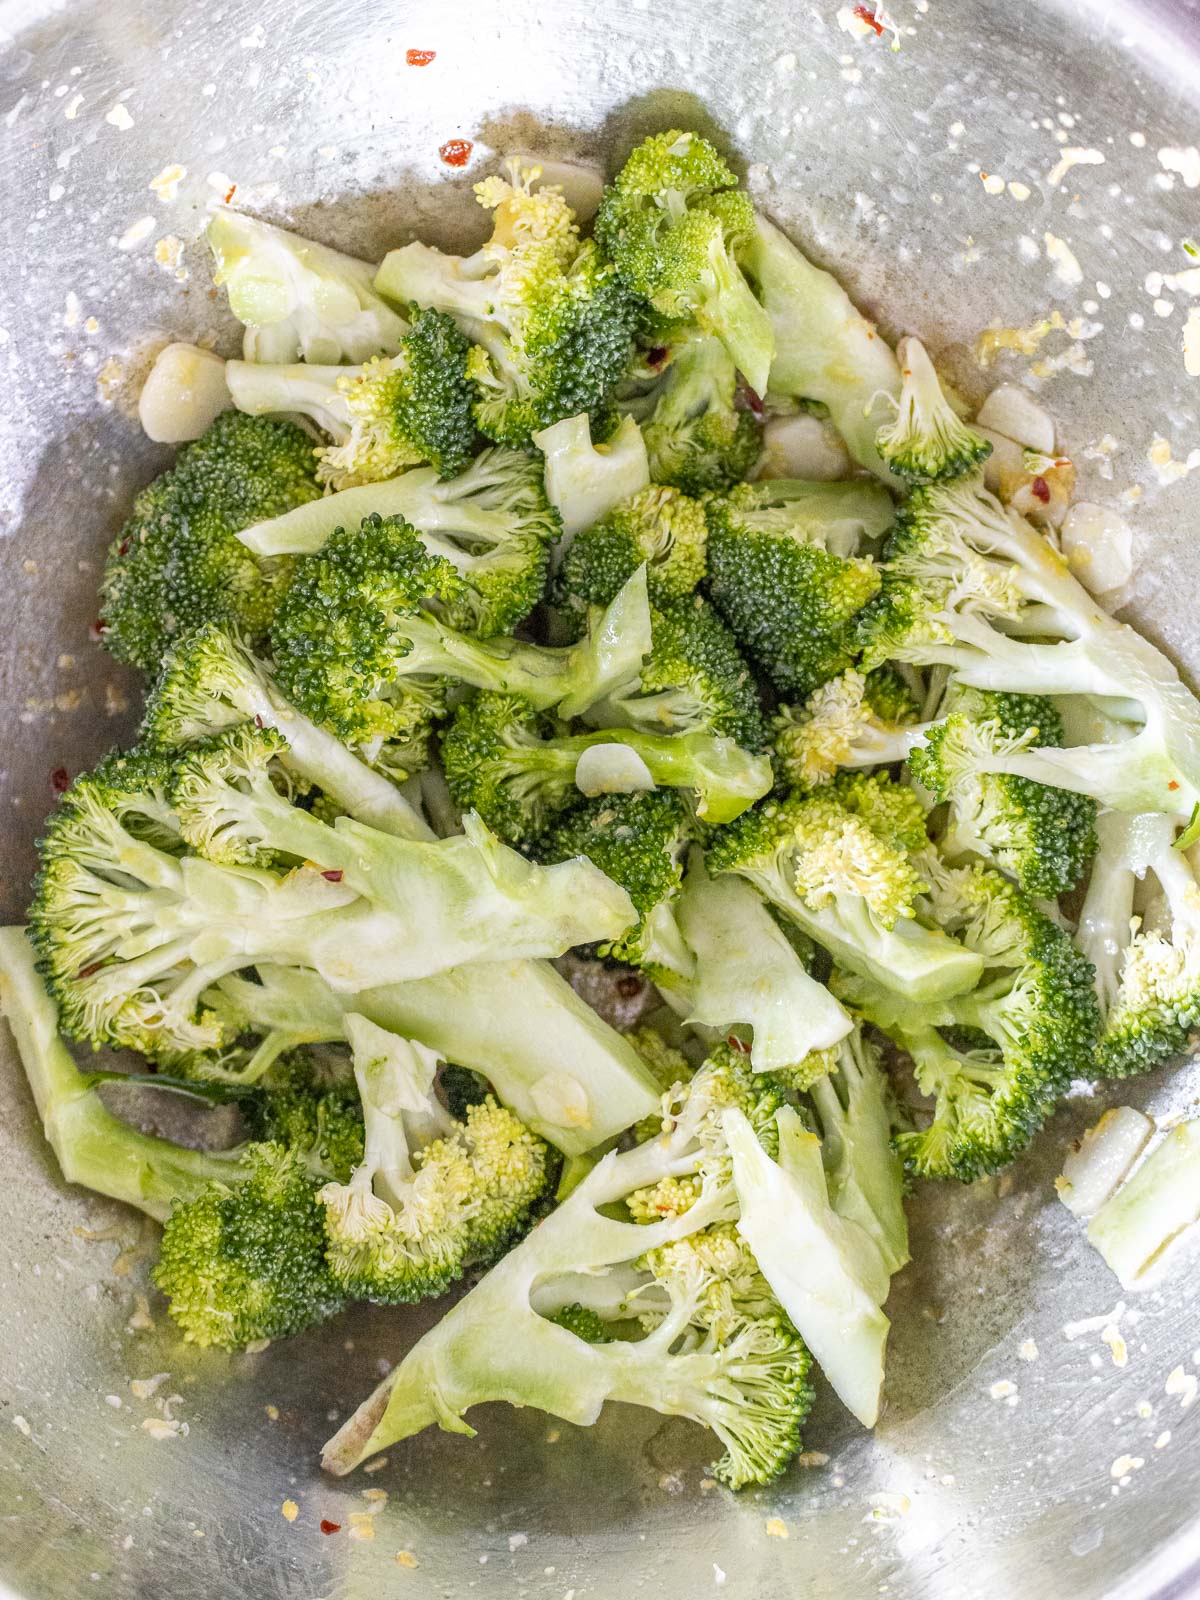 mixing the broccoli with the dressing